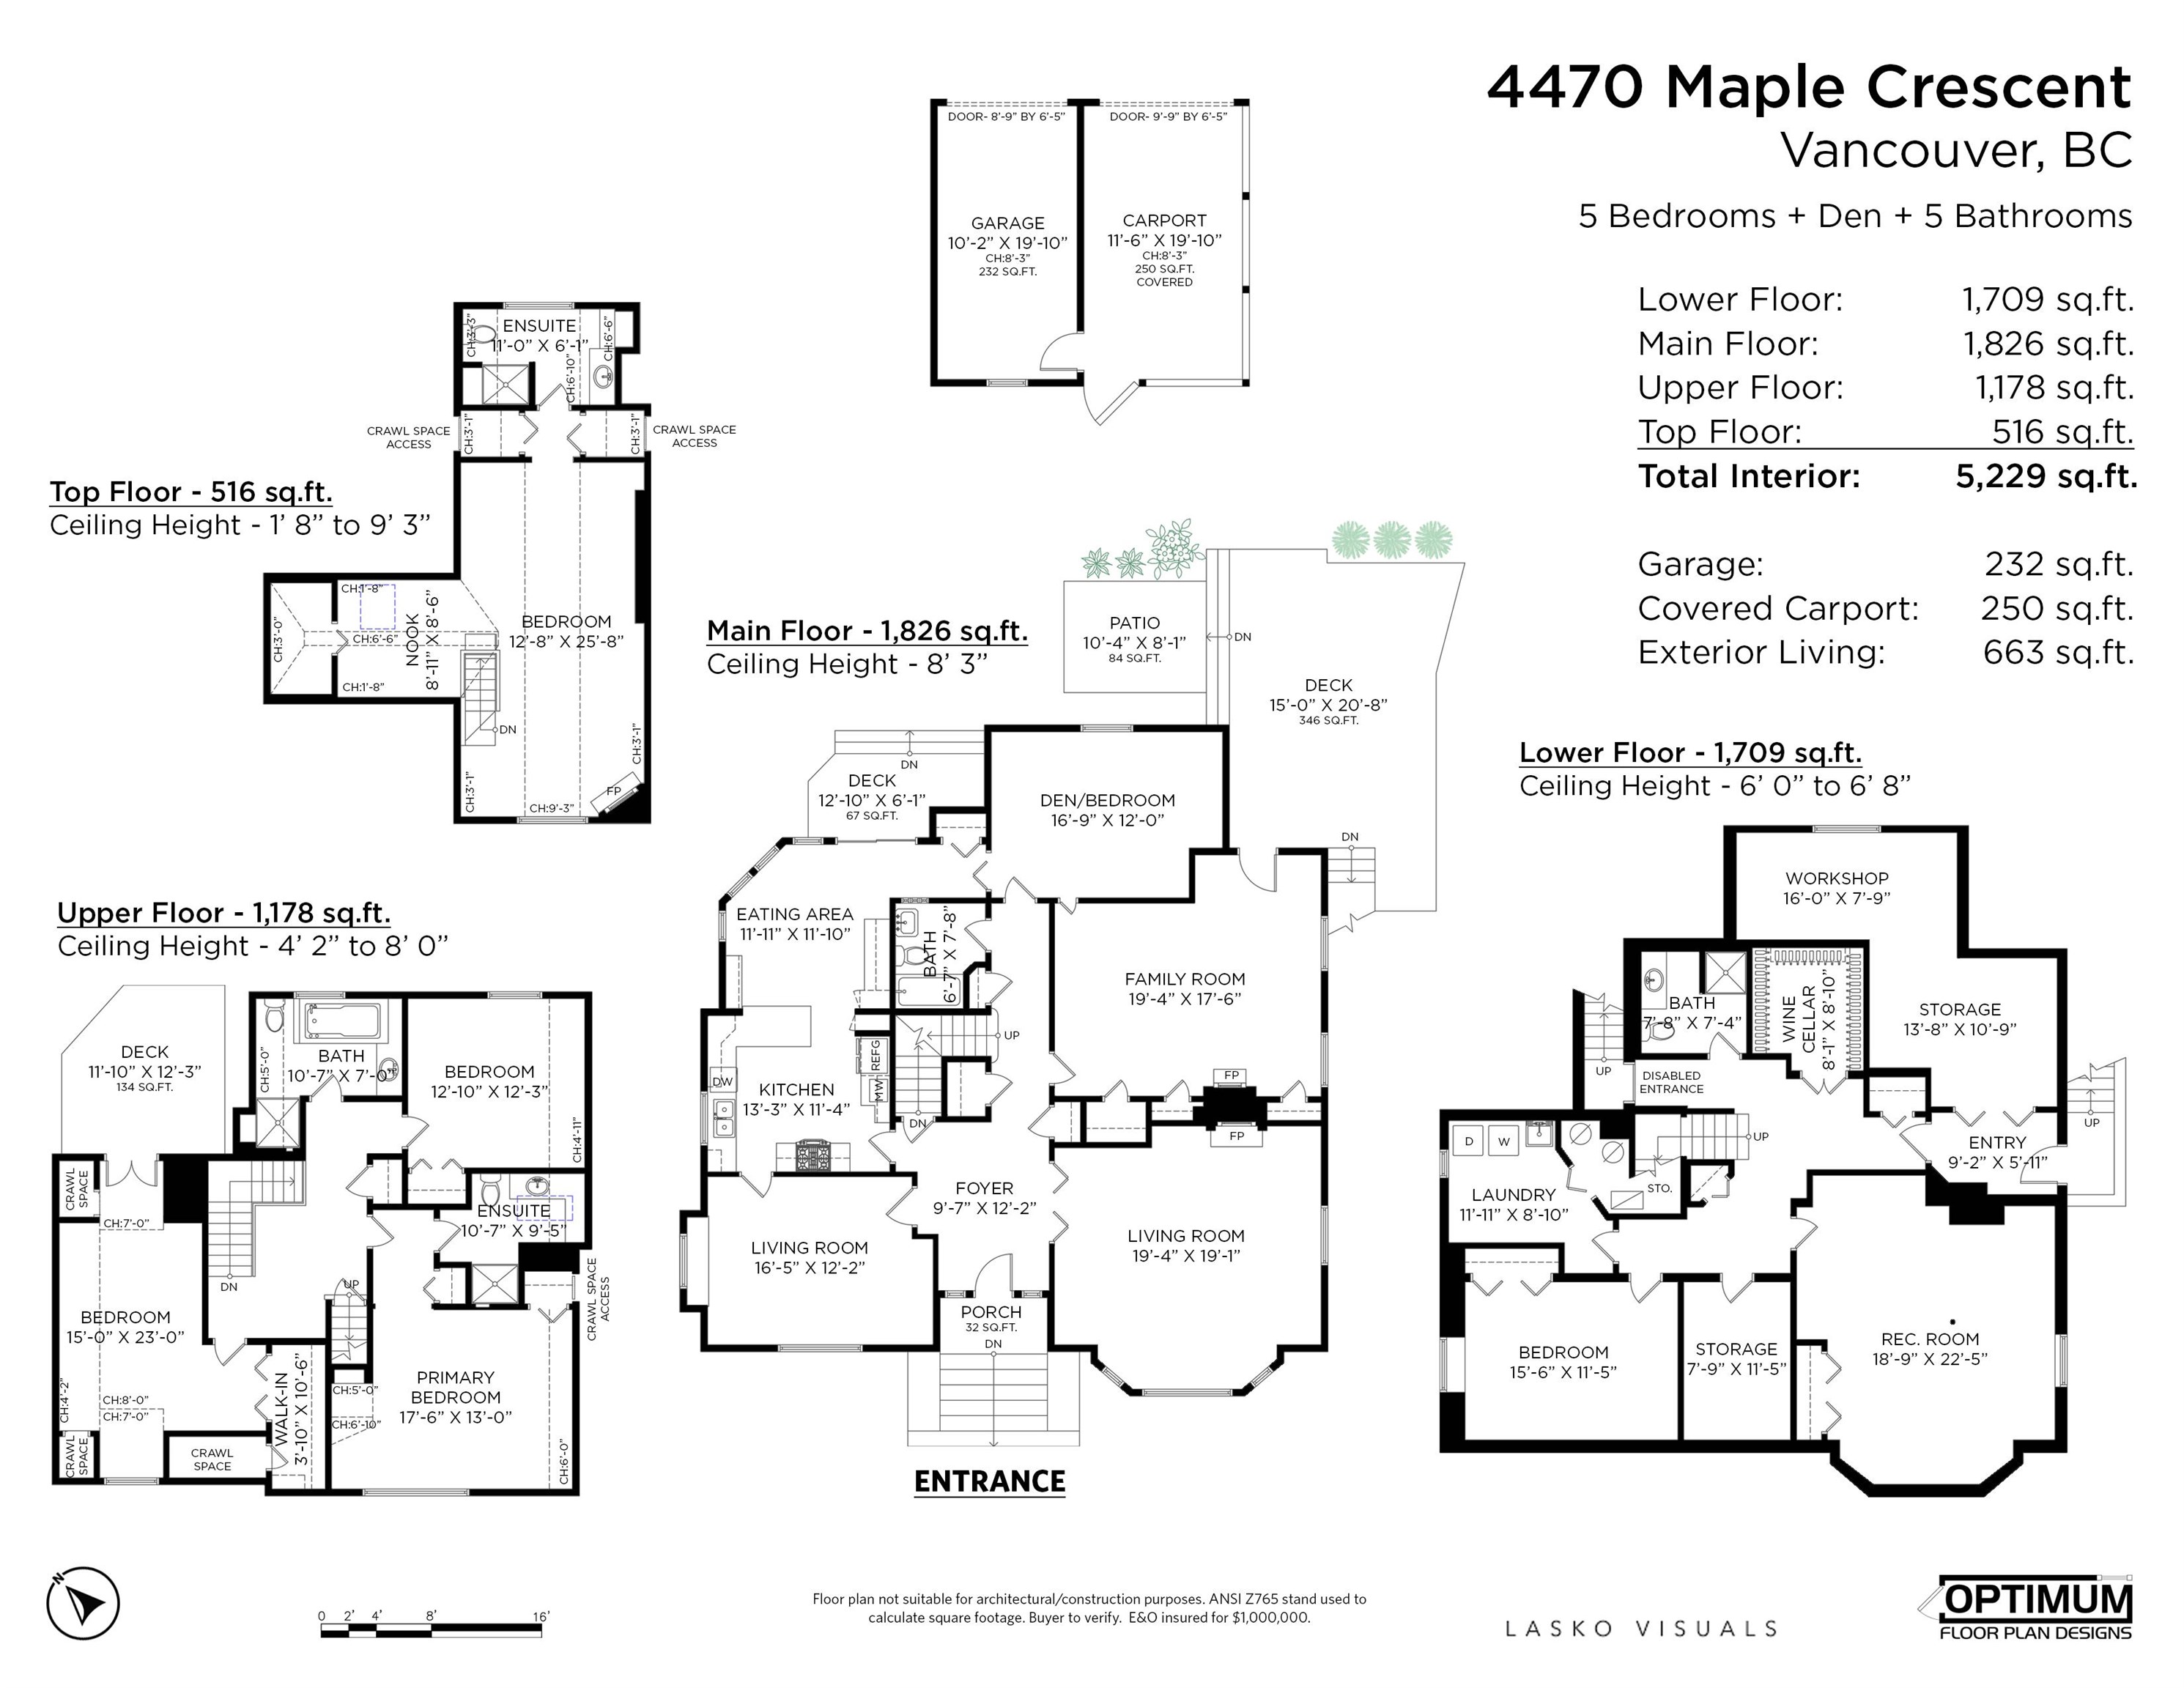 Listing image of 4470 MAPLE CRESCENT